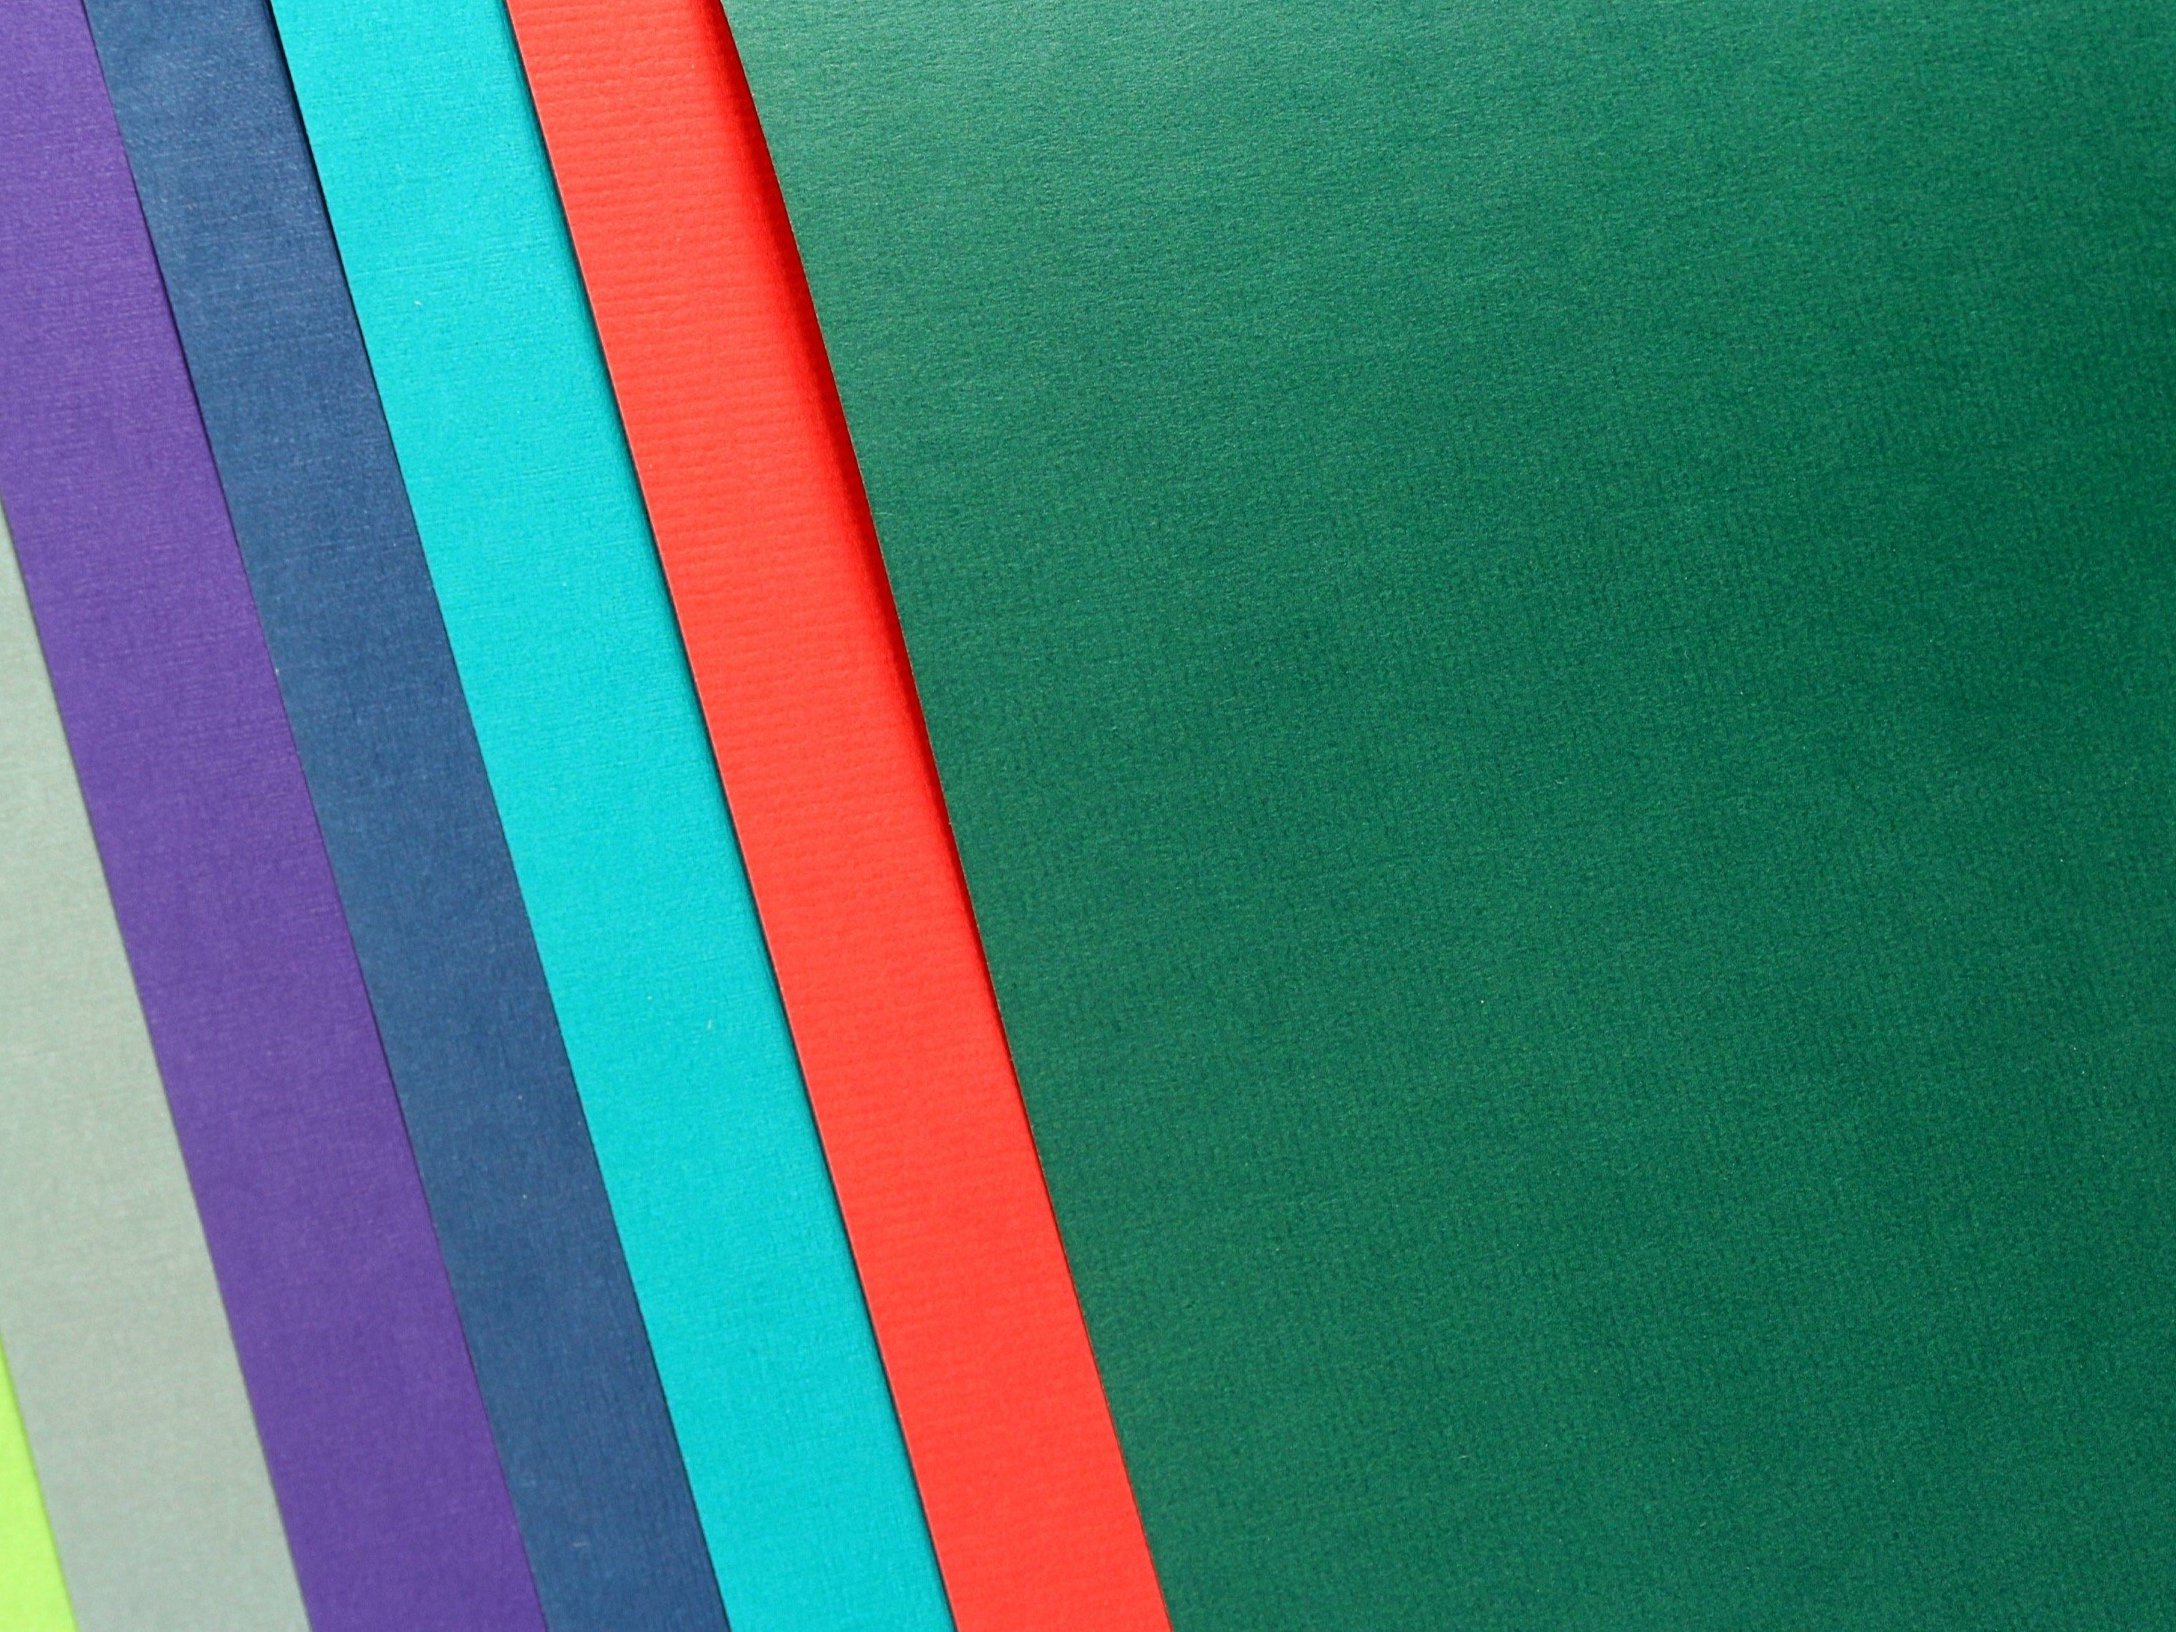 EFALIN | Efalin is a paper that is used for coating products where high surface resistance is required. It comes in 23 colors and 5 structures.